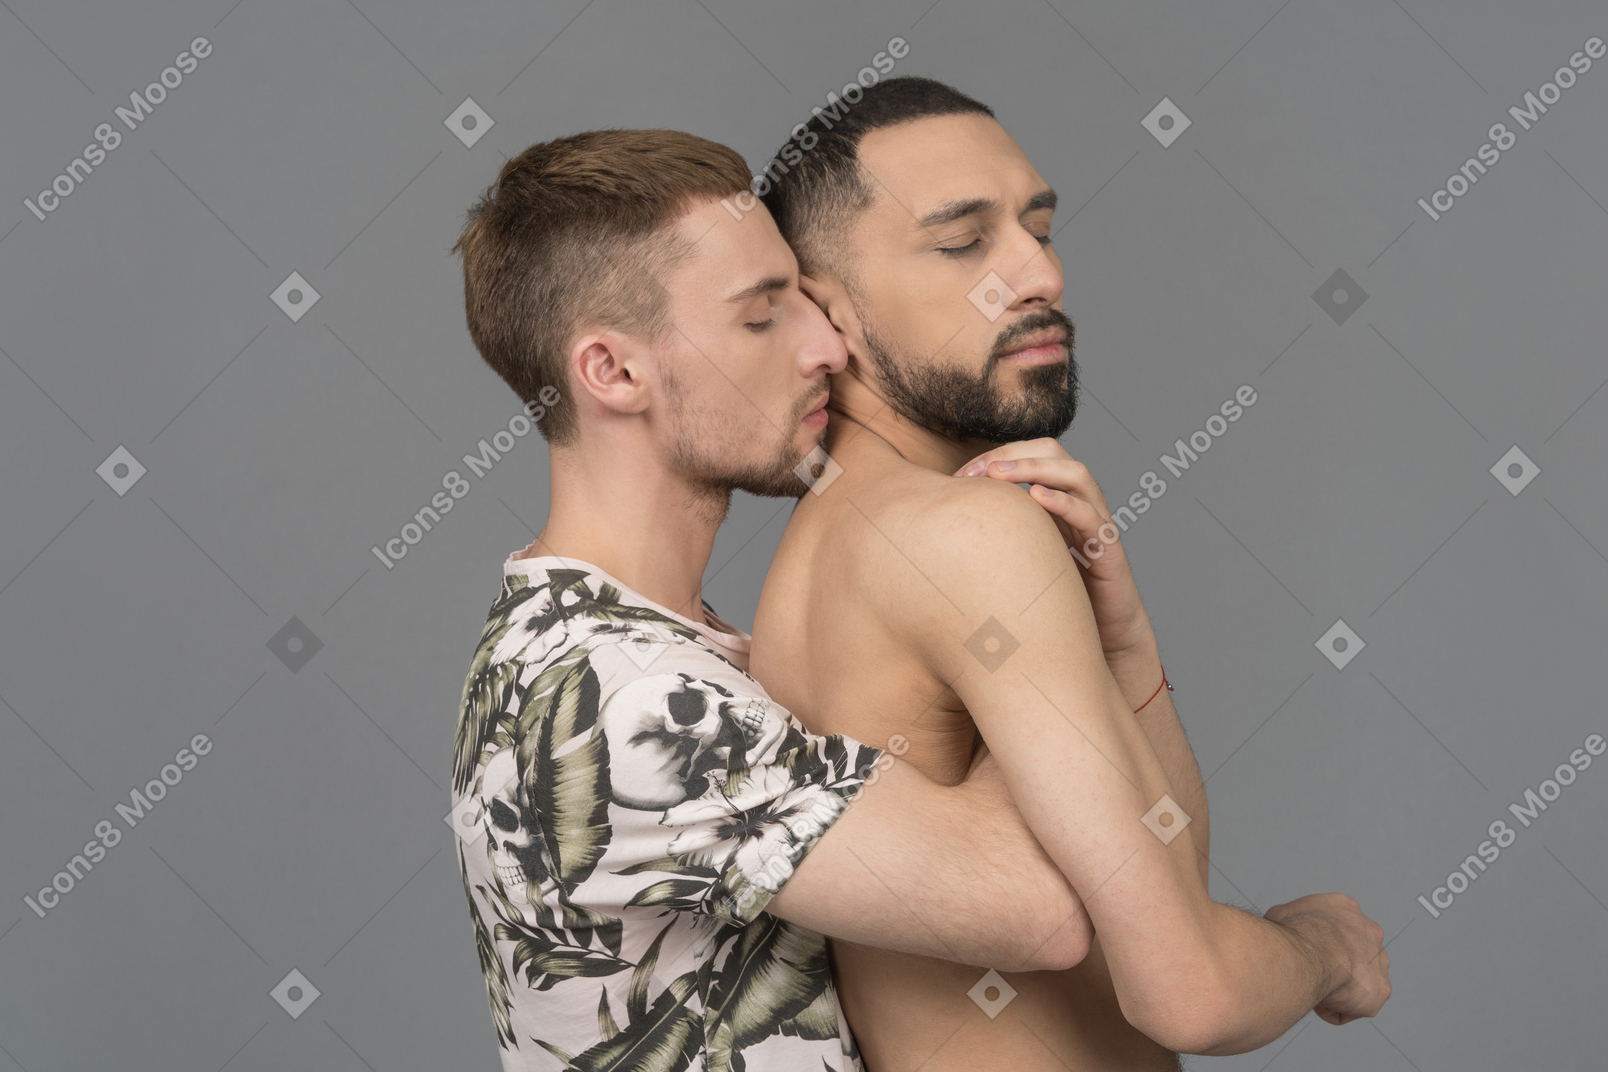 Сlose-up of a young man back hugging his shirtless lover